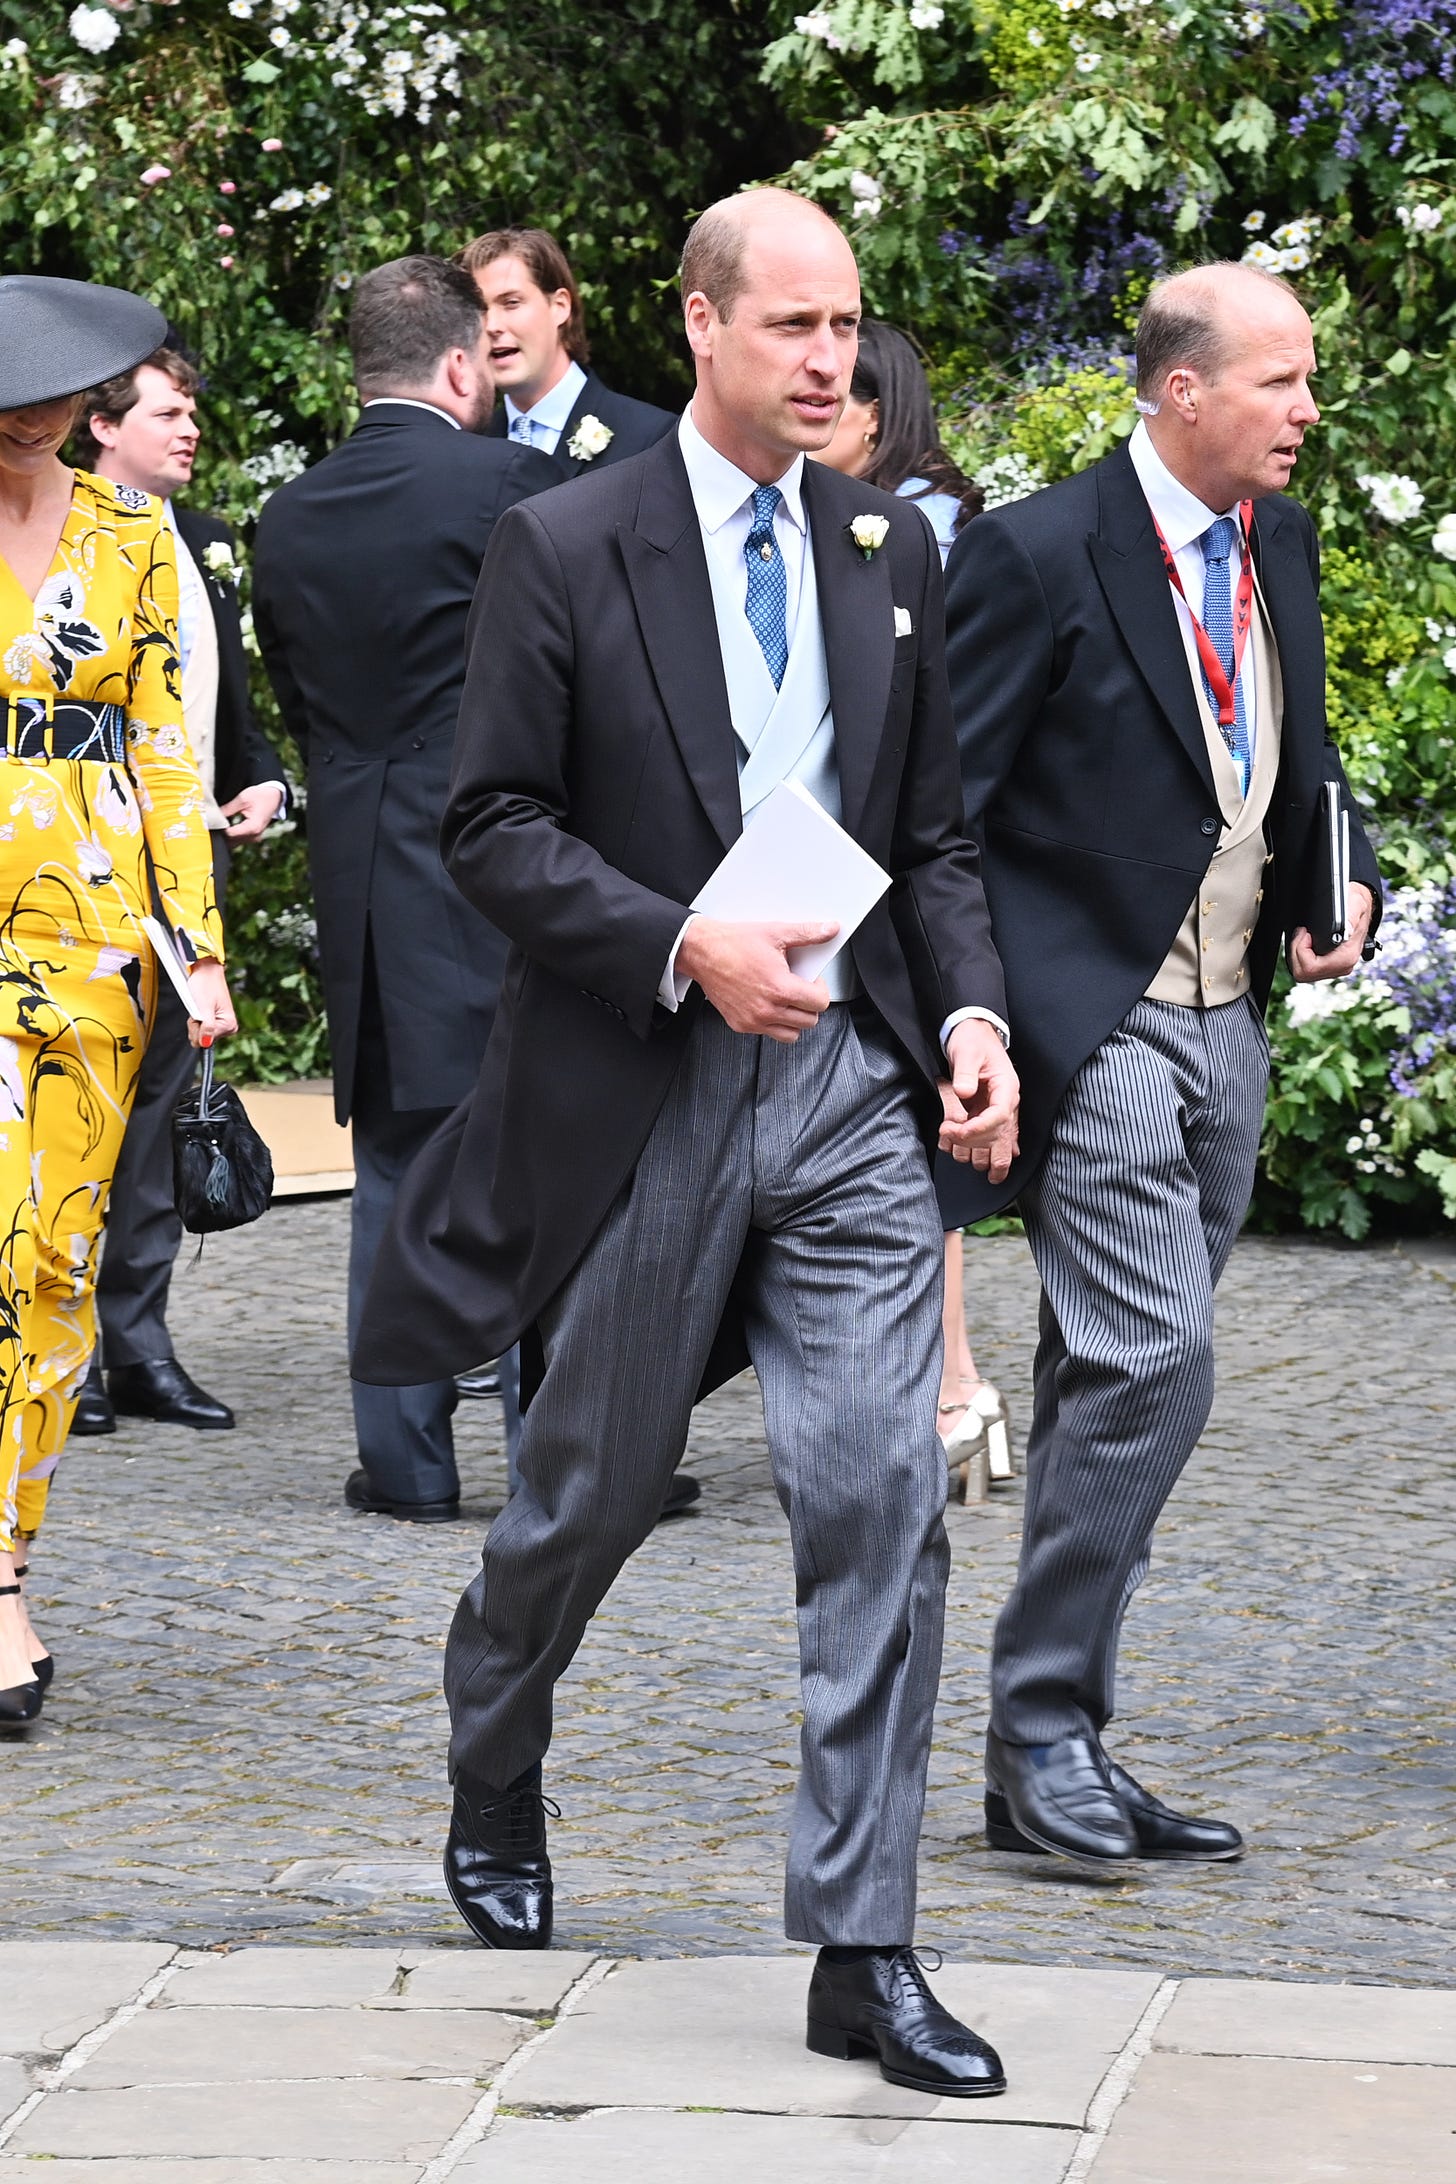 prince william attends duke of westminster's wedding